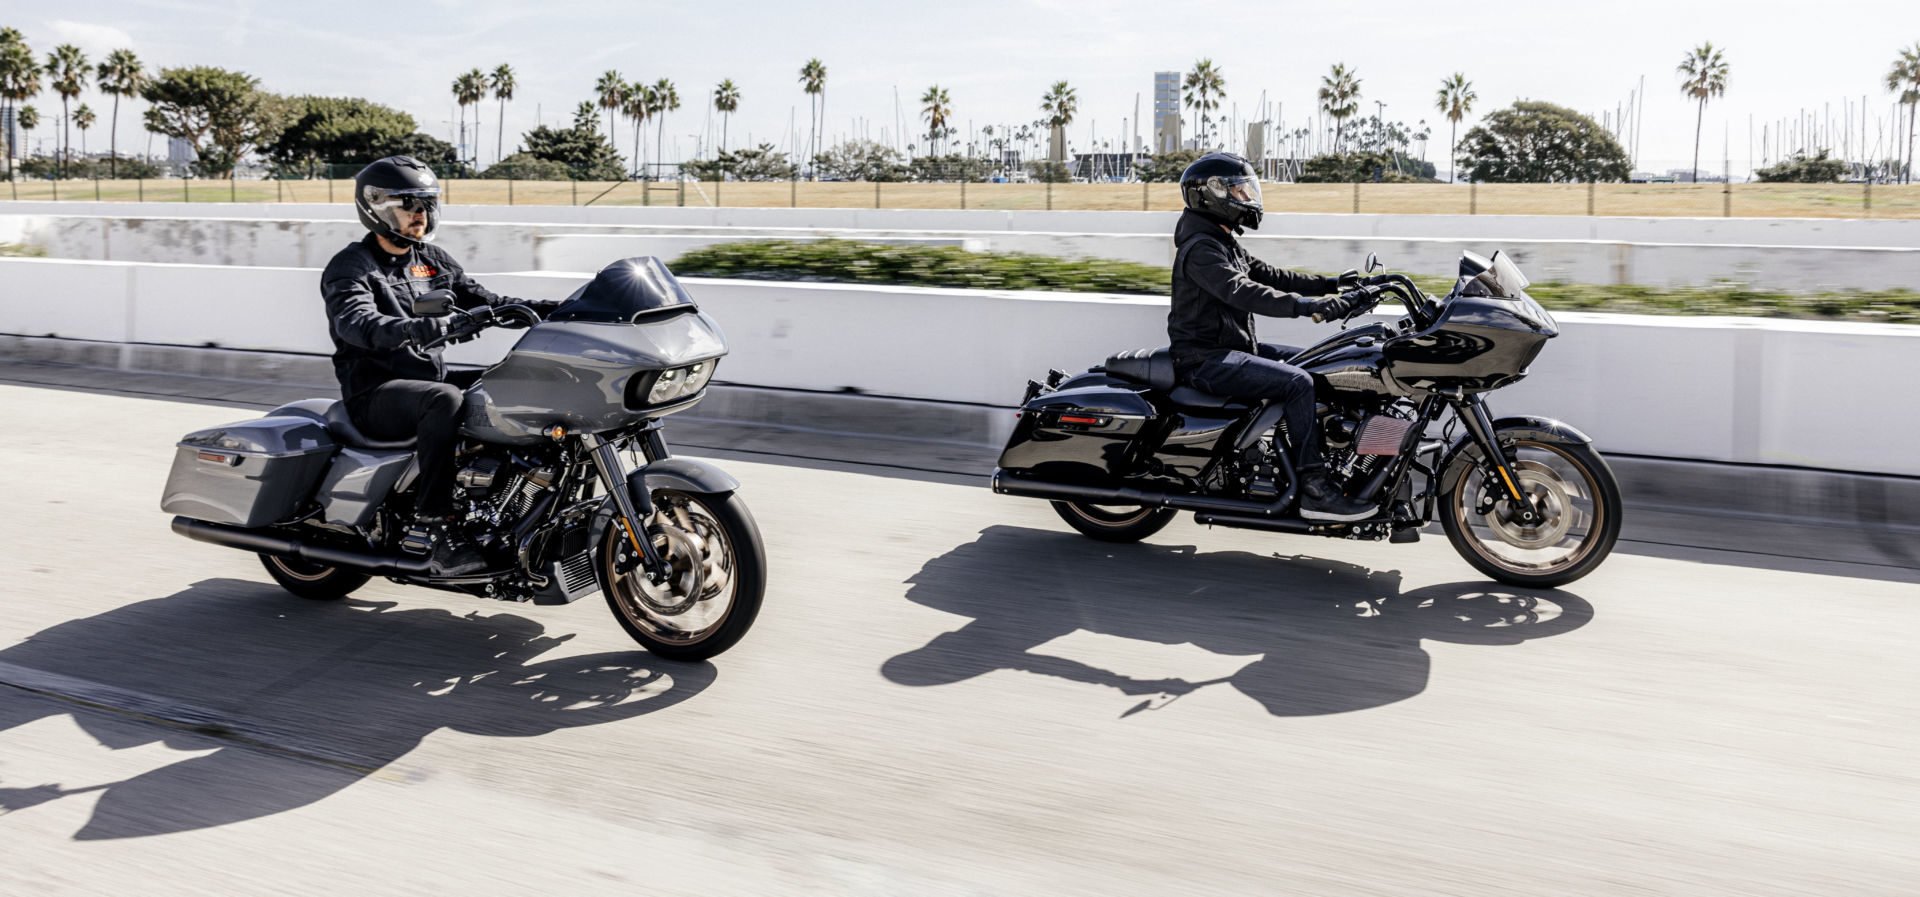 Harley-Davidson's MotoAmerica King Of The Baggers-inspired 2022-model Road Glide ST (left) and an accessorized Road Glide ST (right). Photo courtesy Harley-Davidson.